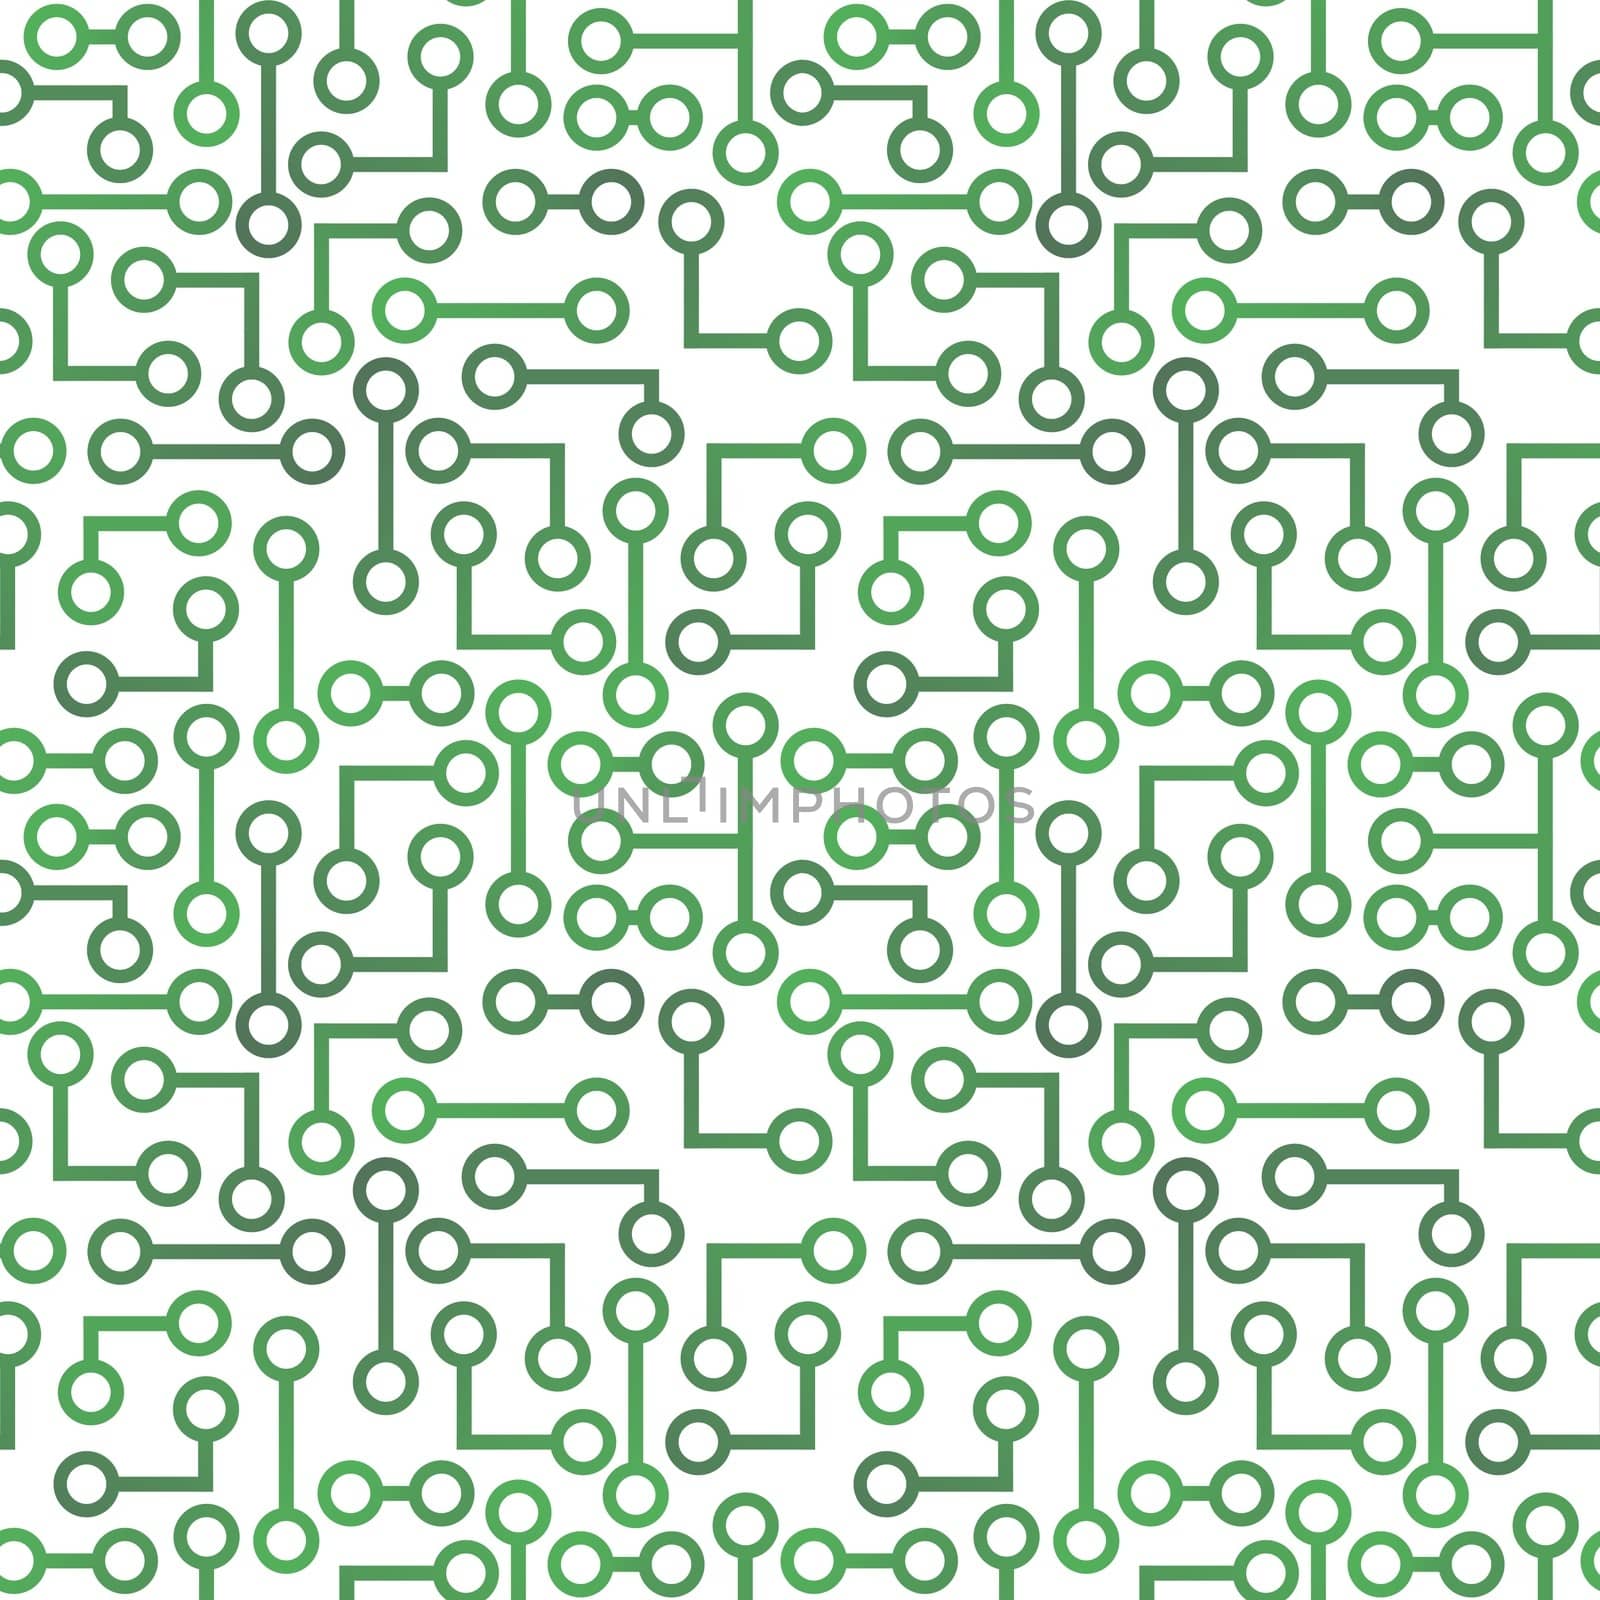 Illustration of a seamless background resembling electronic circuit board